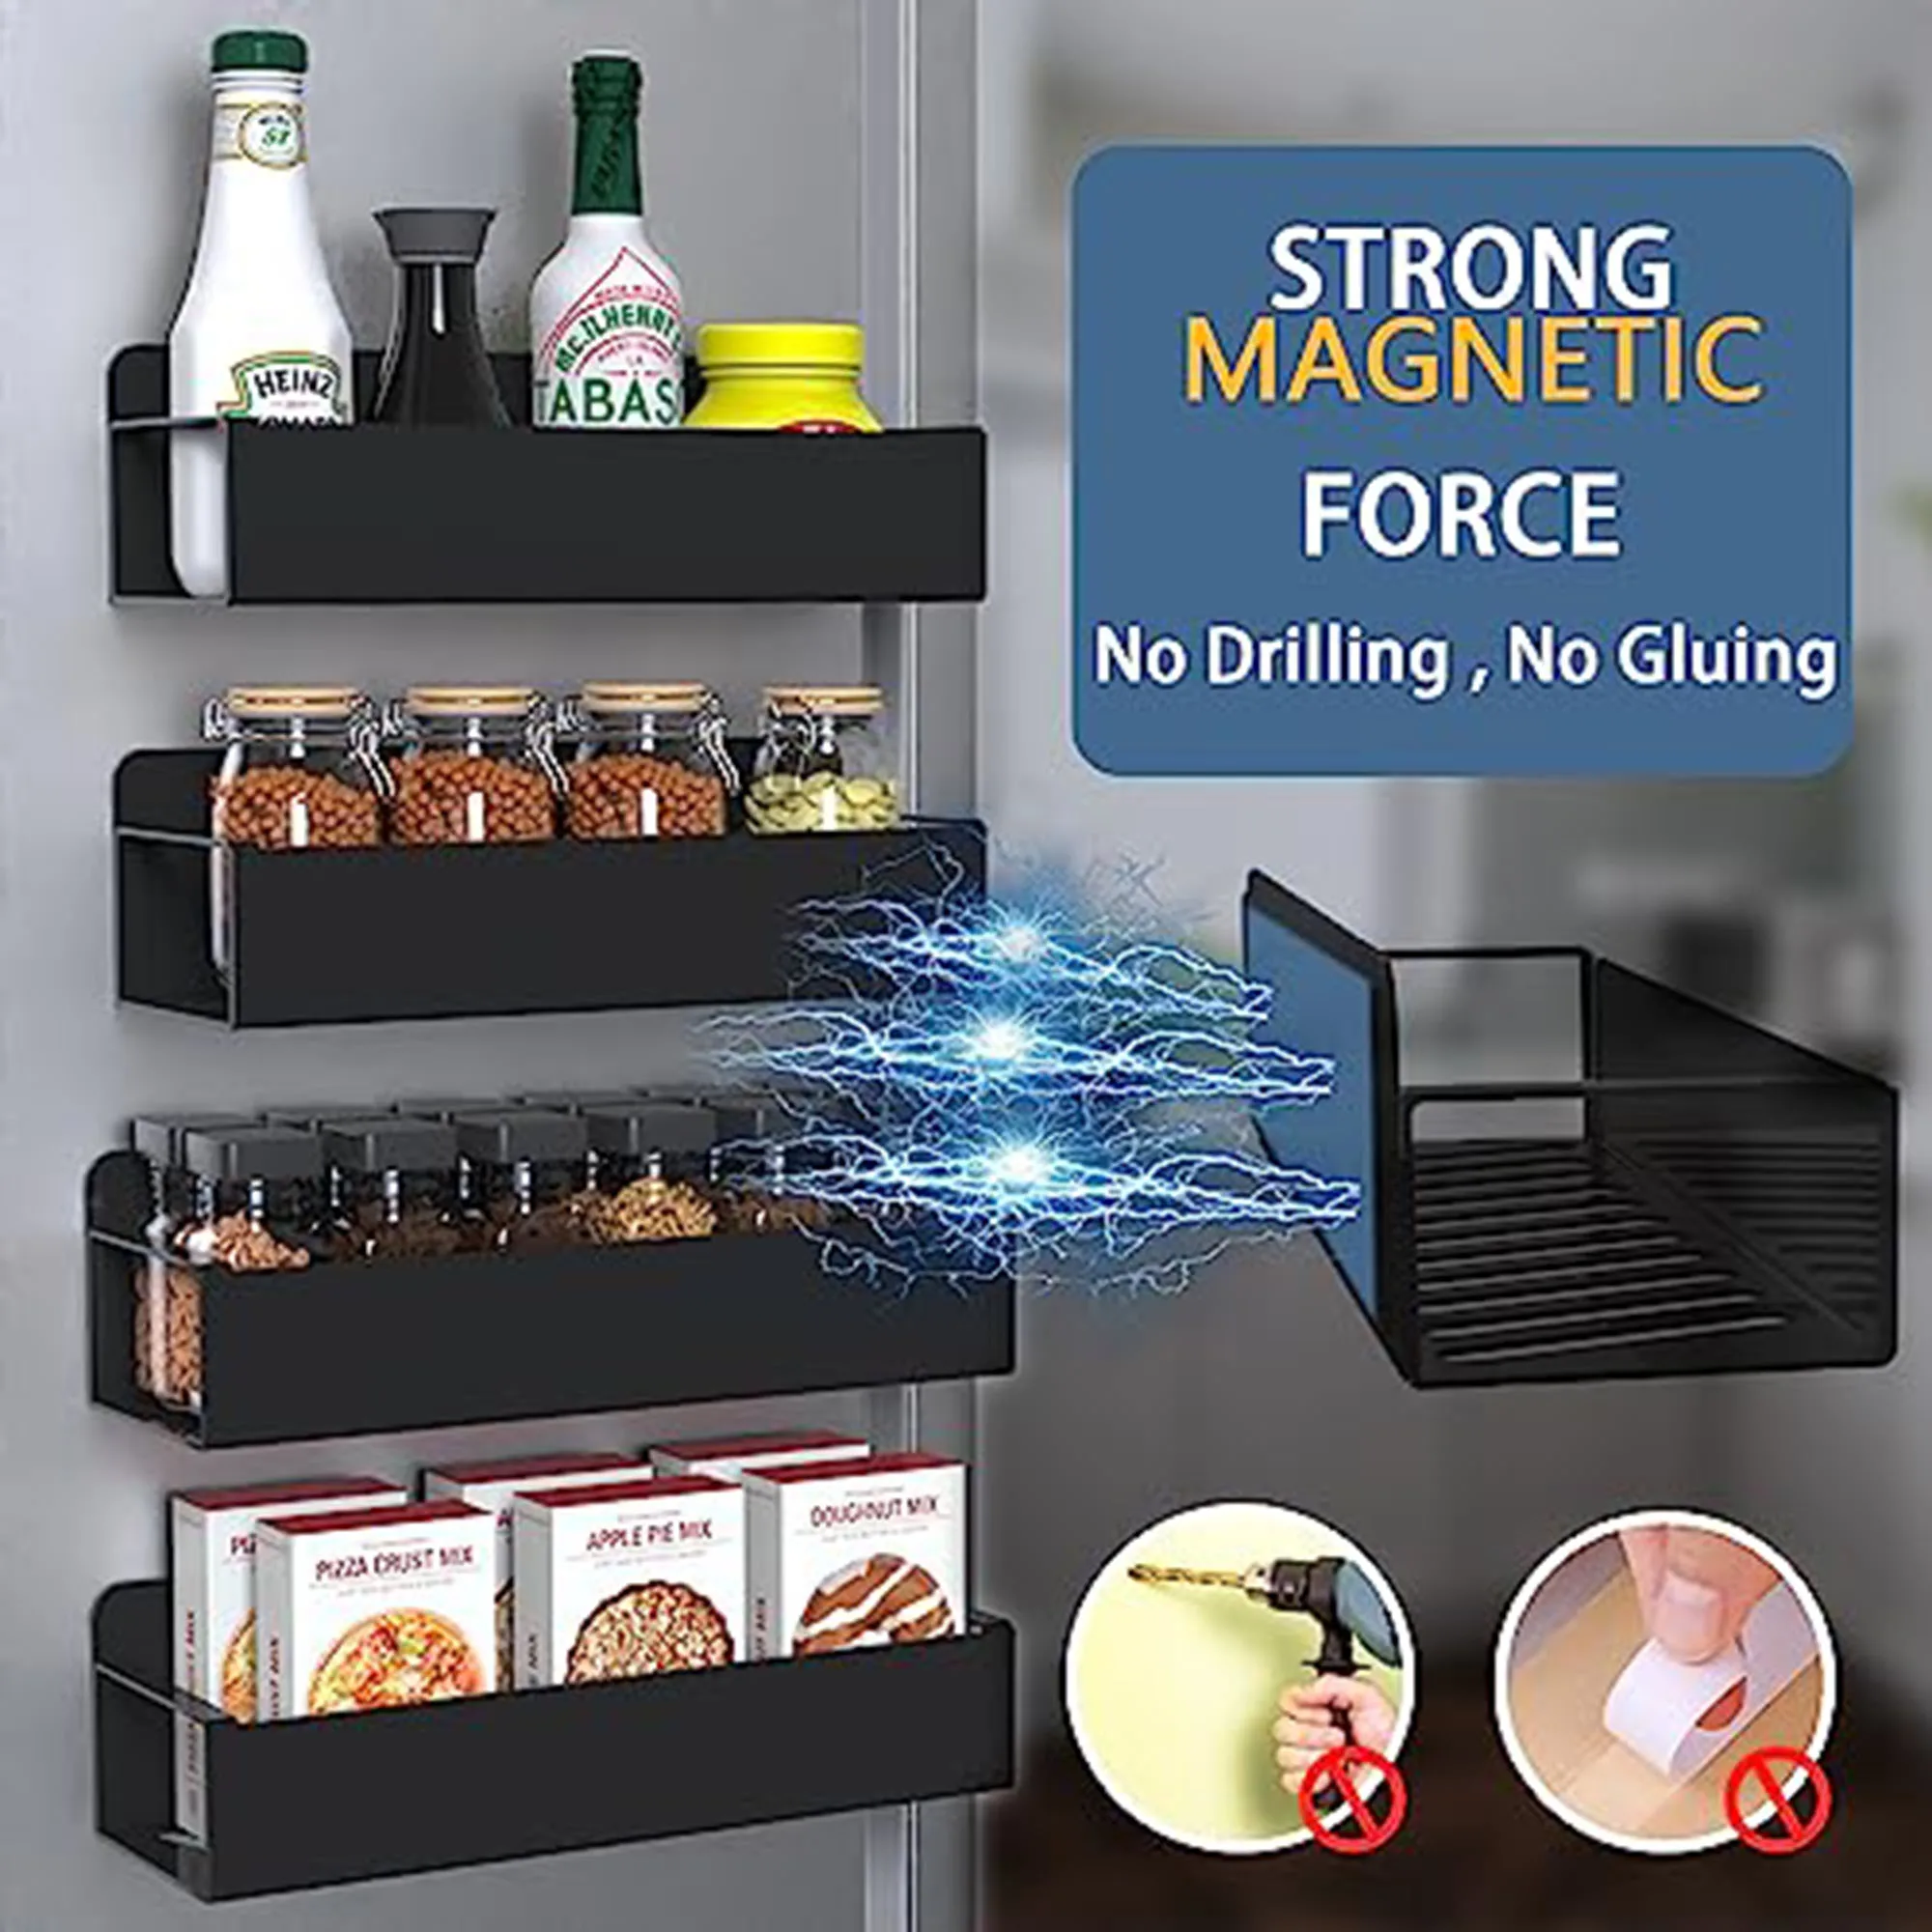 https://ae01.alicdn.com/kf/A2d7acaee6e3b490ba09dc29a1dcdde6fl/Magnetic-Spice-Rack-Organizer-for-Cabinet-Space-Saver-for-Refrigerator-and-Microwave-Oven-Metal-Fridge-Shelf.jpg